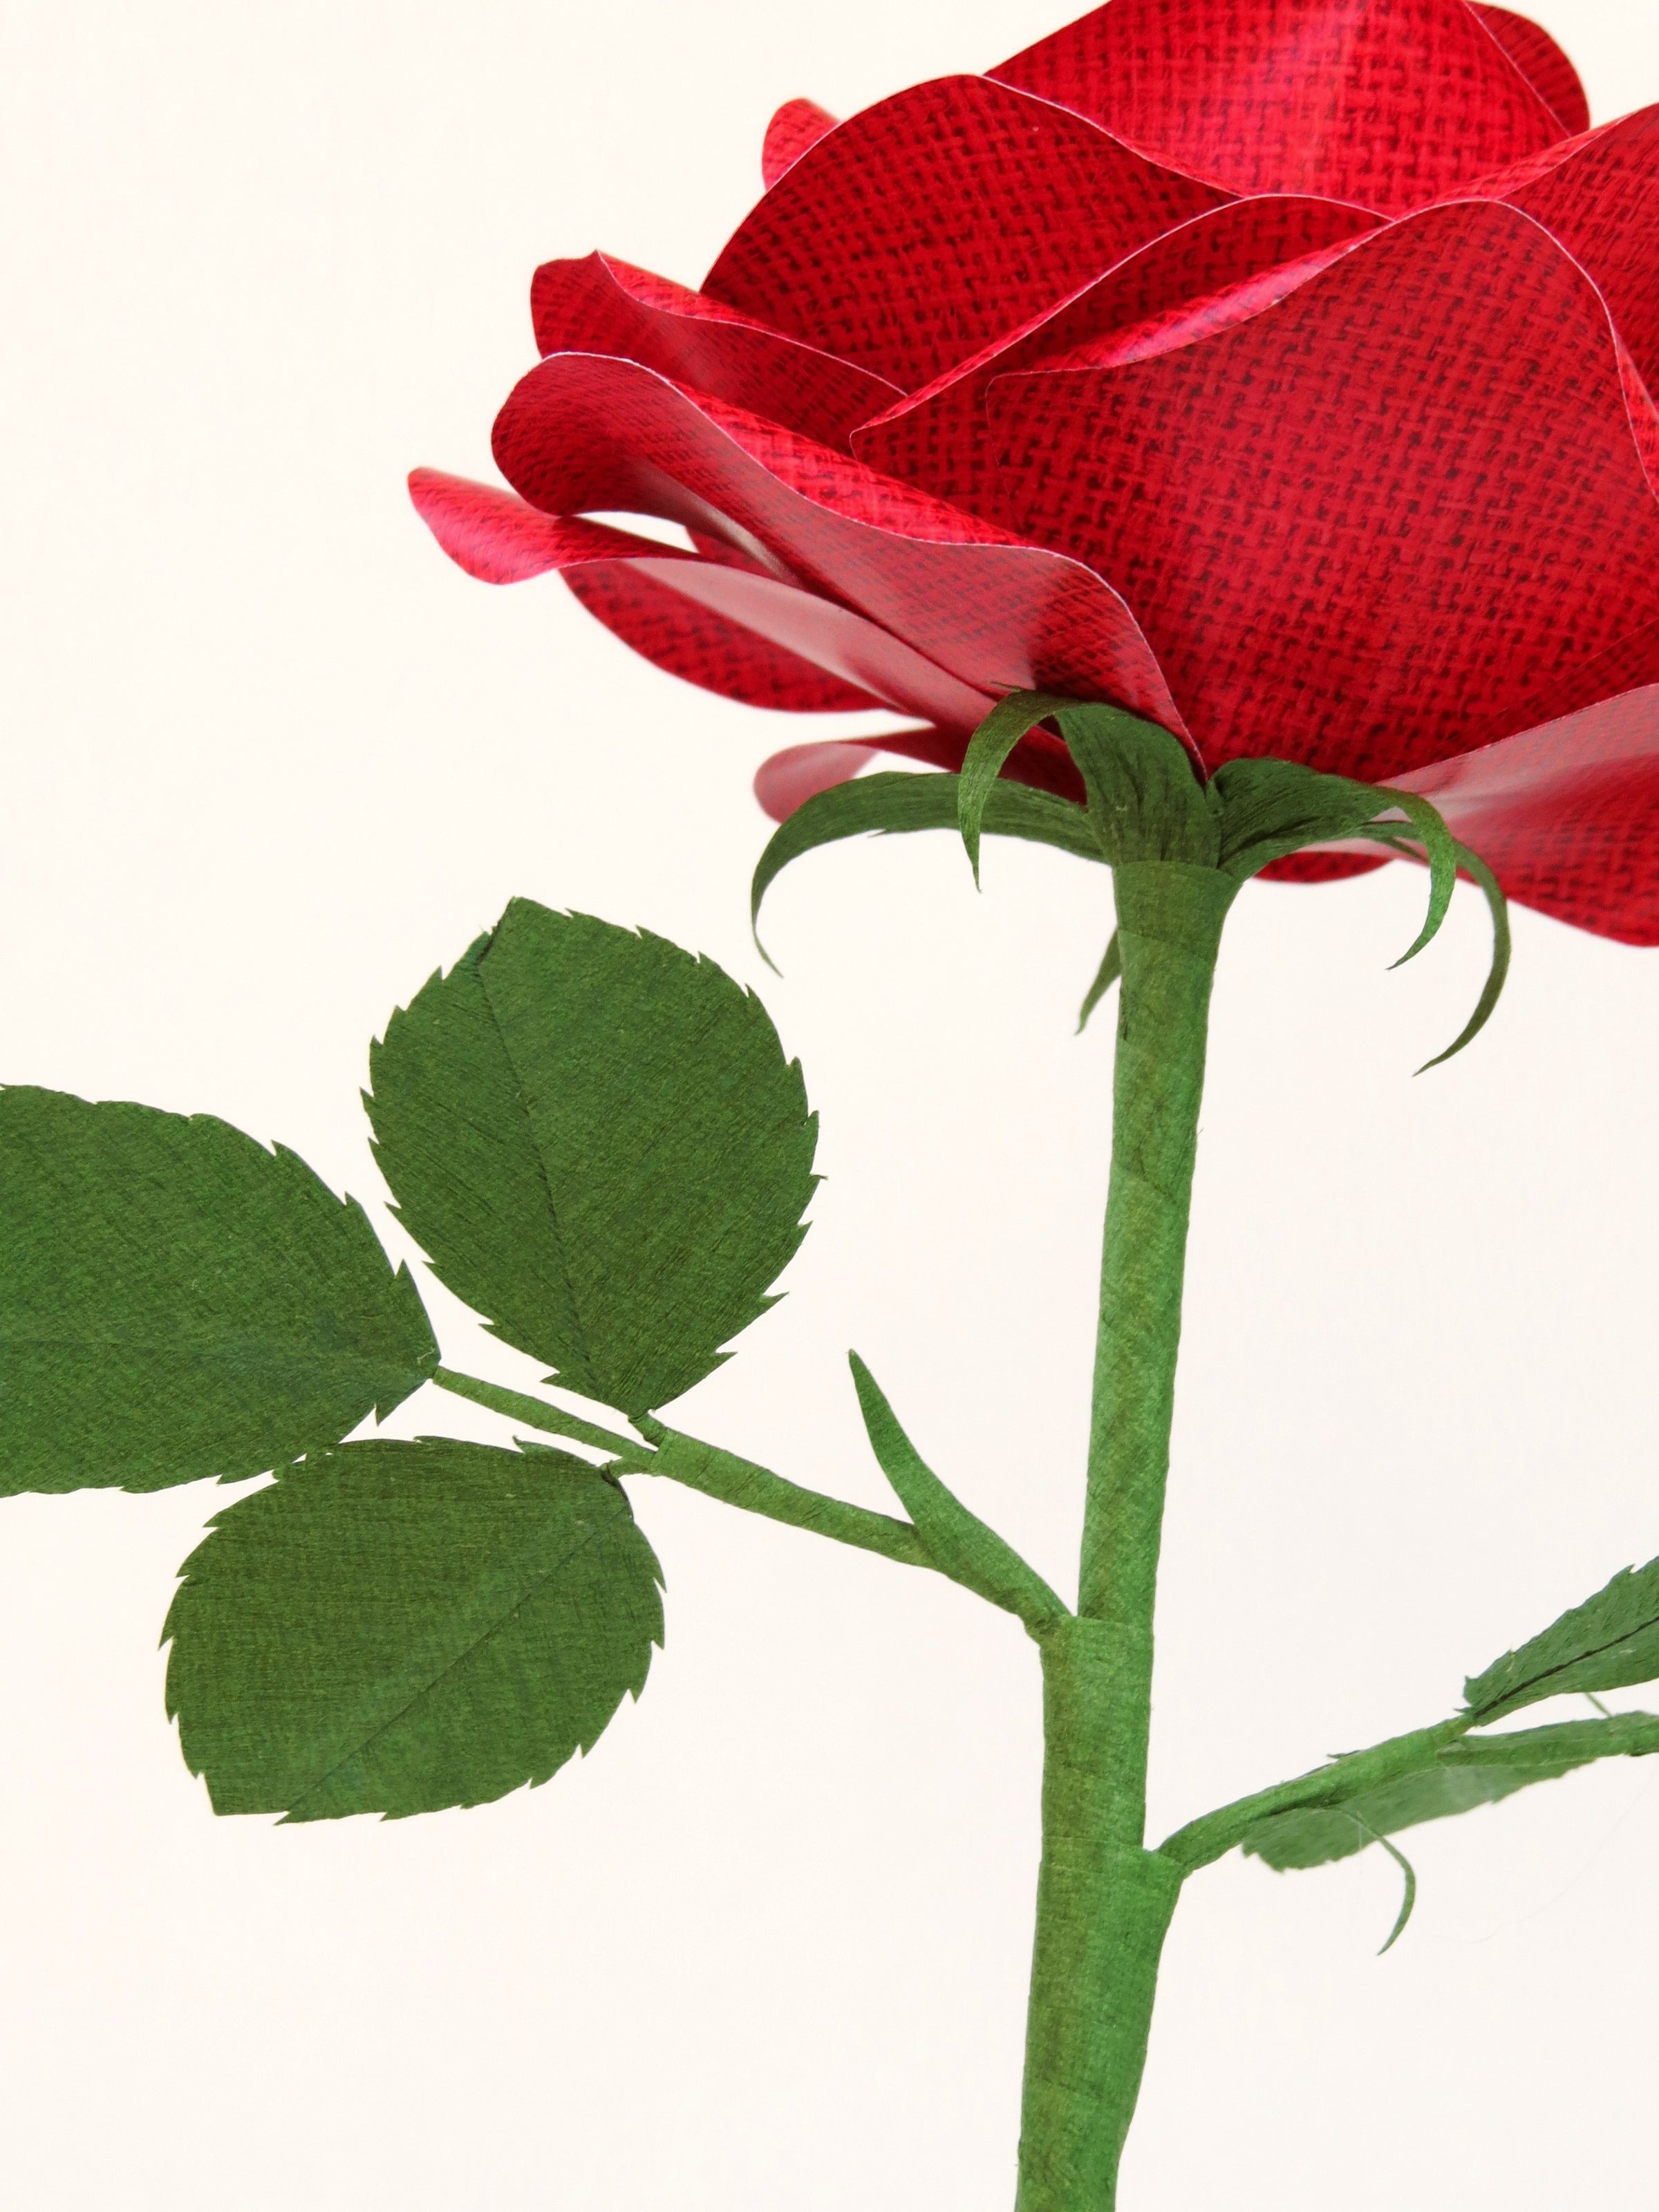 Detailed view of the back of a red linen grain rose with a green curled calyx underneath the red petals, and the green stem and leaves just in view